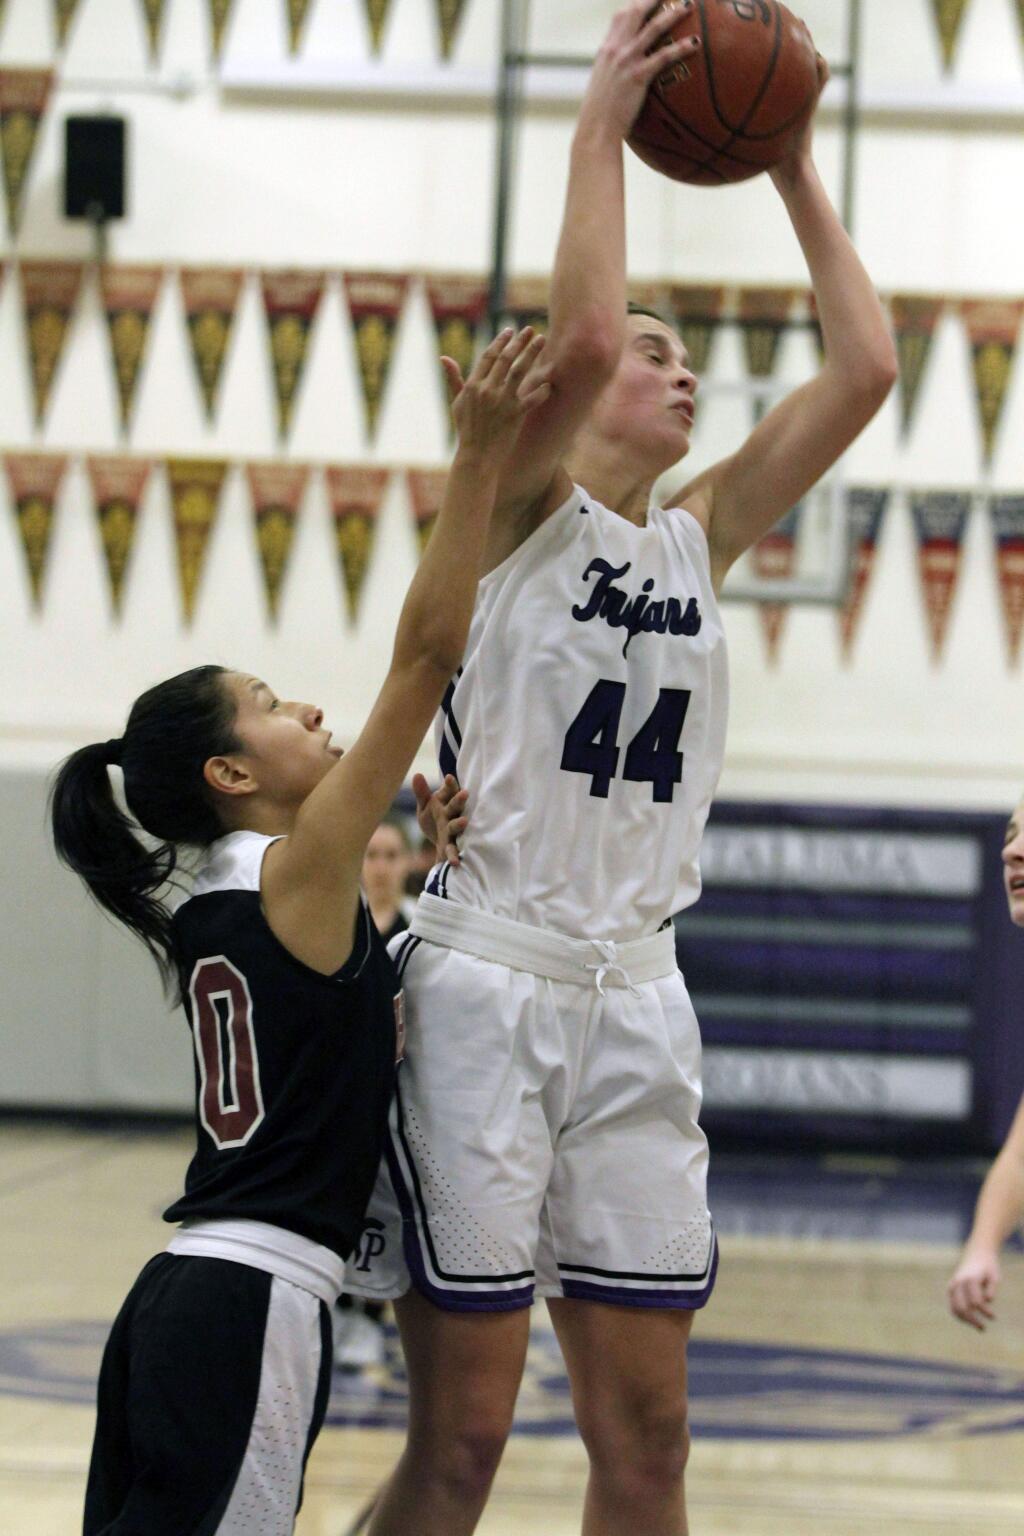 DWIGHT SUGIOKA/FOR THE ARGUS-COURIERJaden Krist soars high to snare a rebound in Petaluma's 43-29 win over Healdsburg.